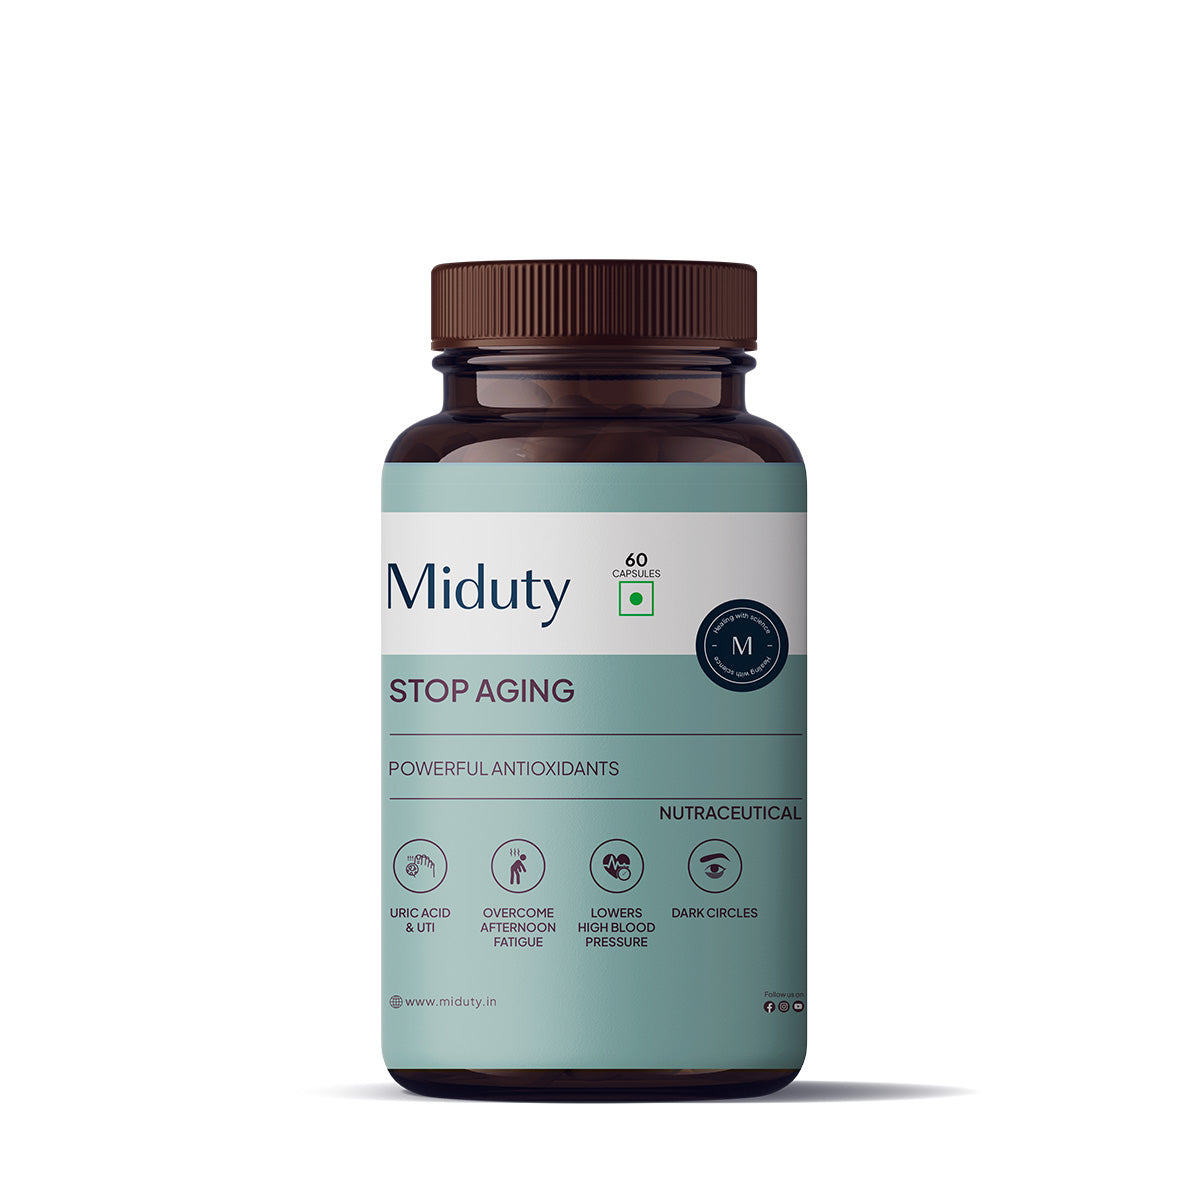 Stop Aging - Miduty